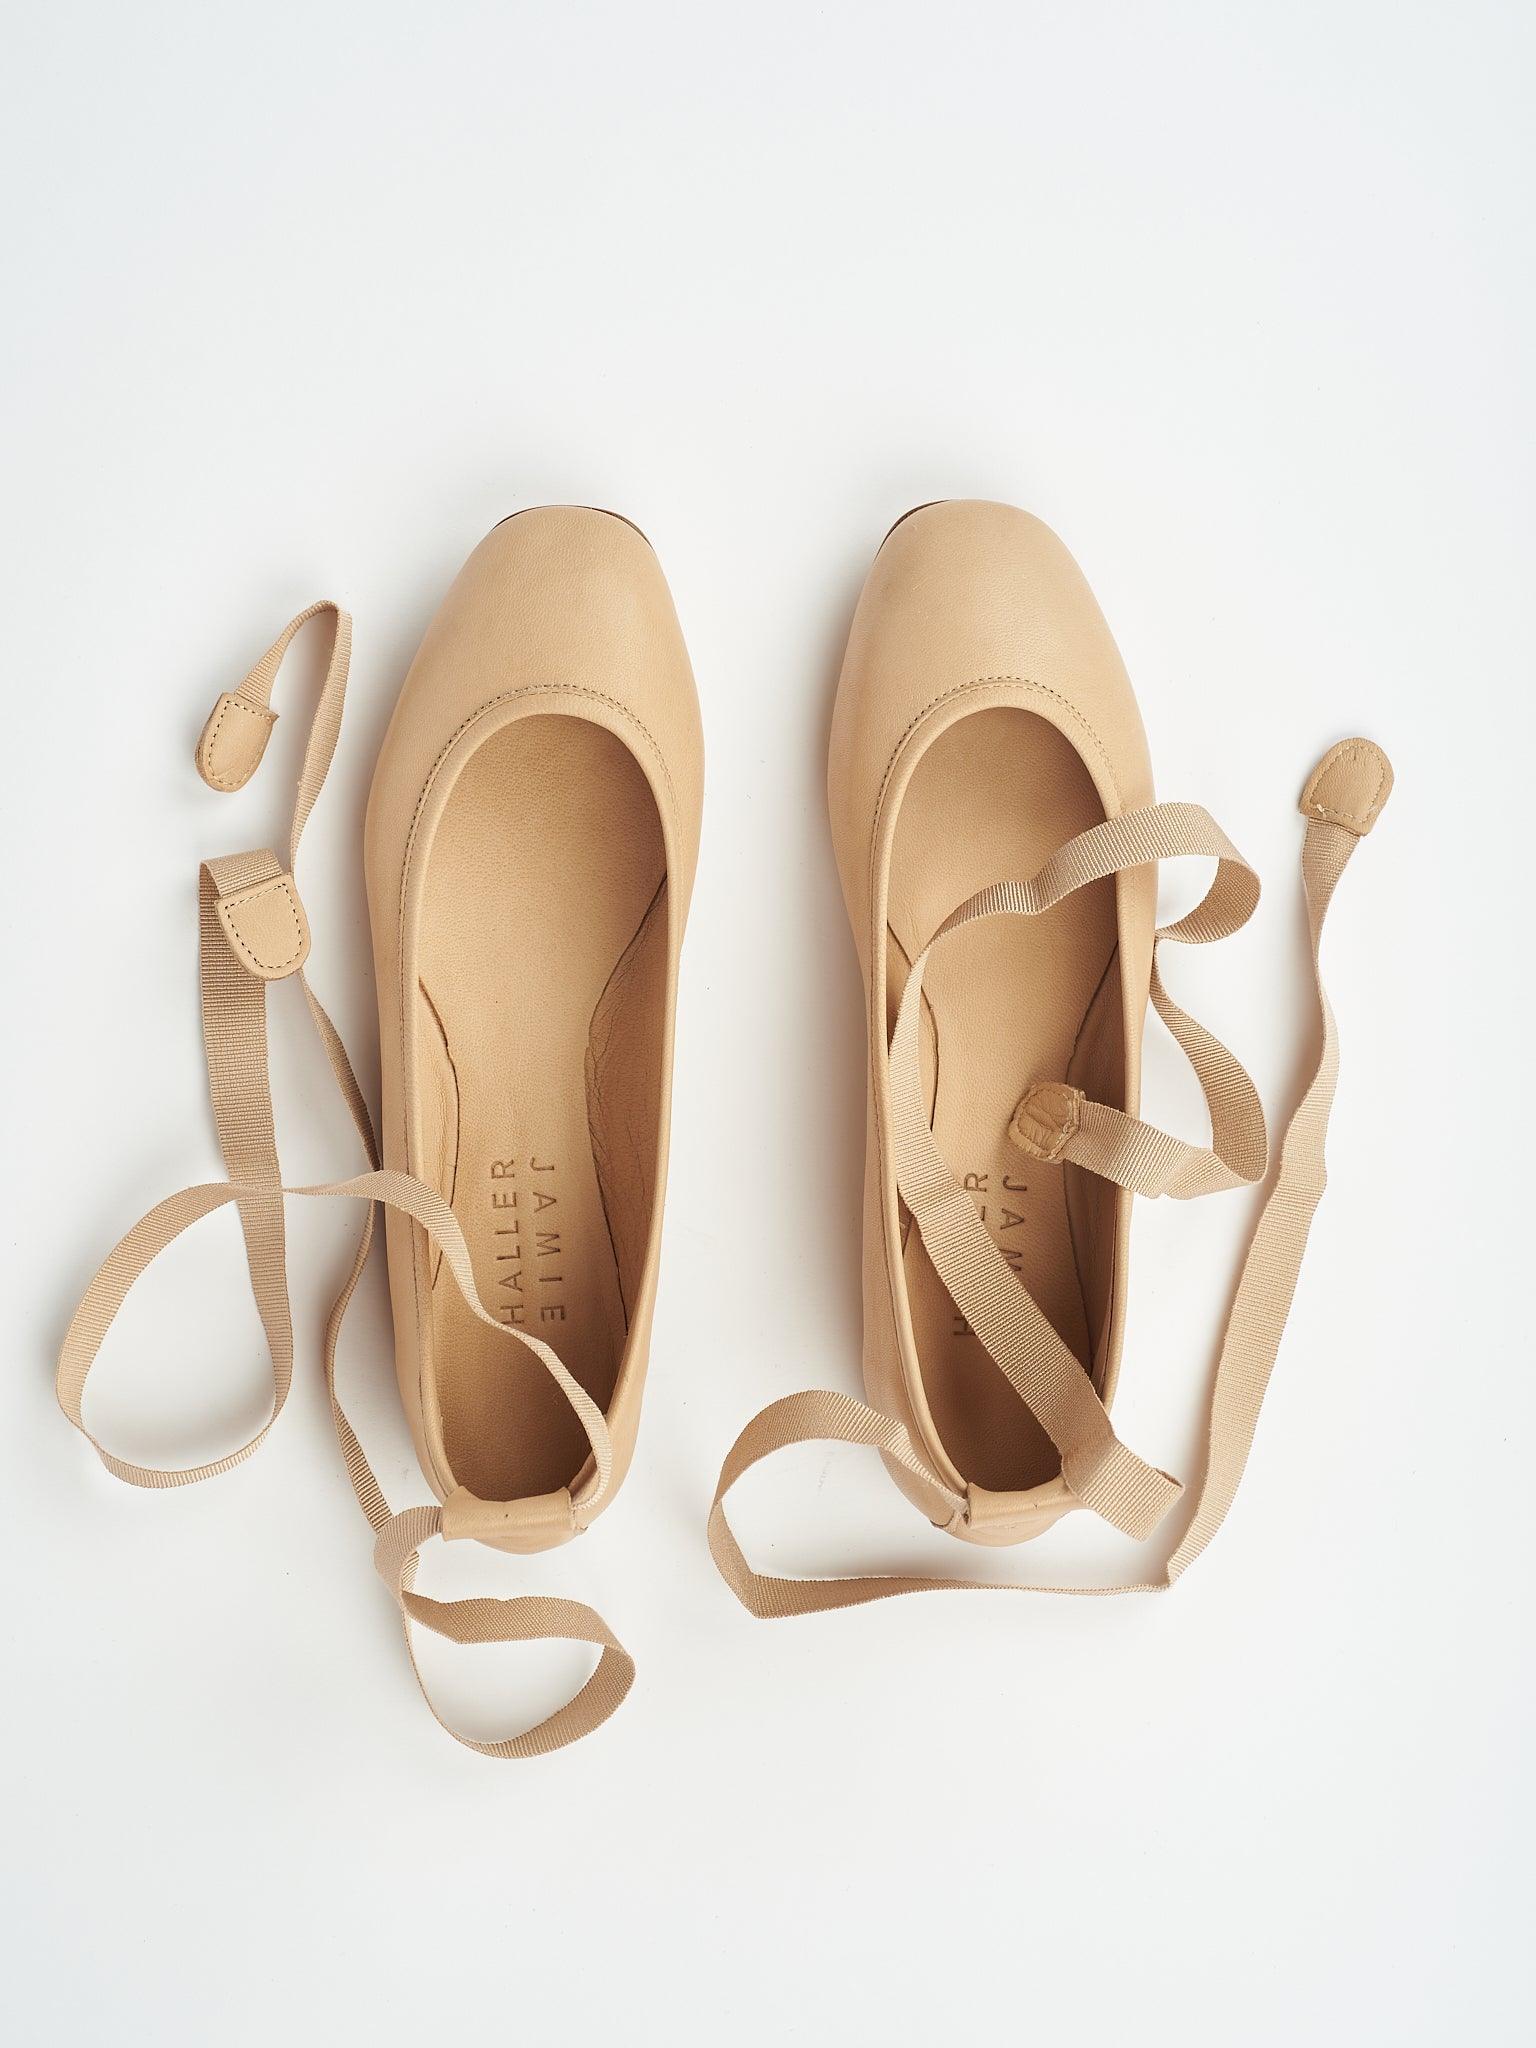 The Point Ballet in Soft Tan Flat View With Ties